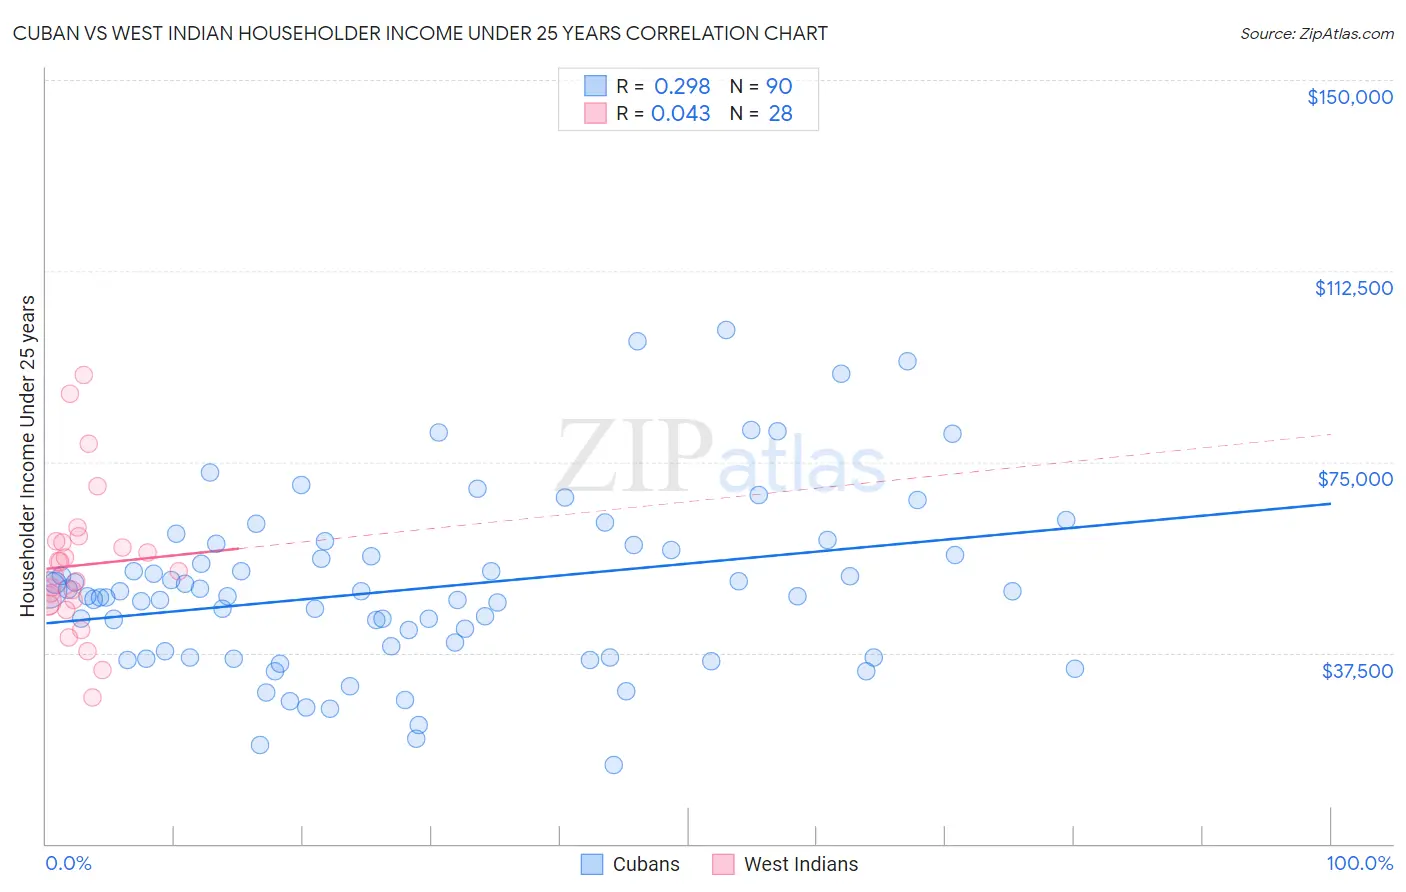 Cuban vs West Indian Householder Income Under 25 years